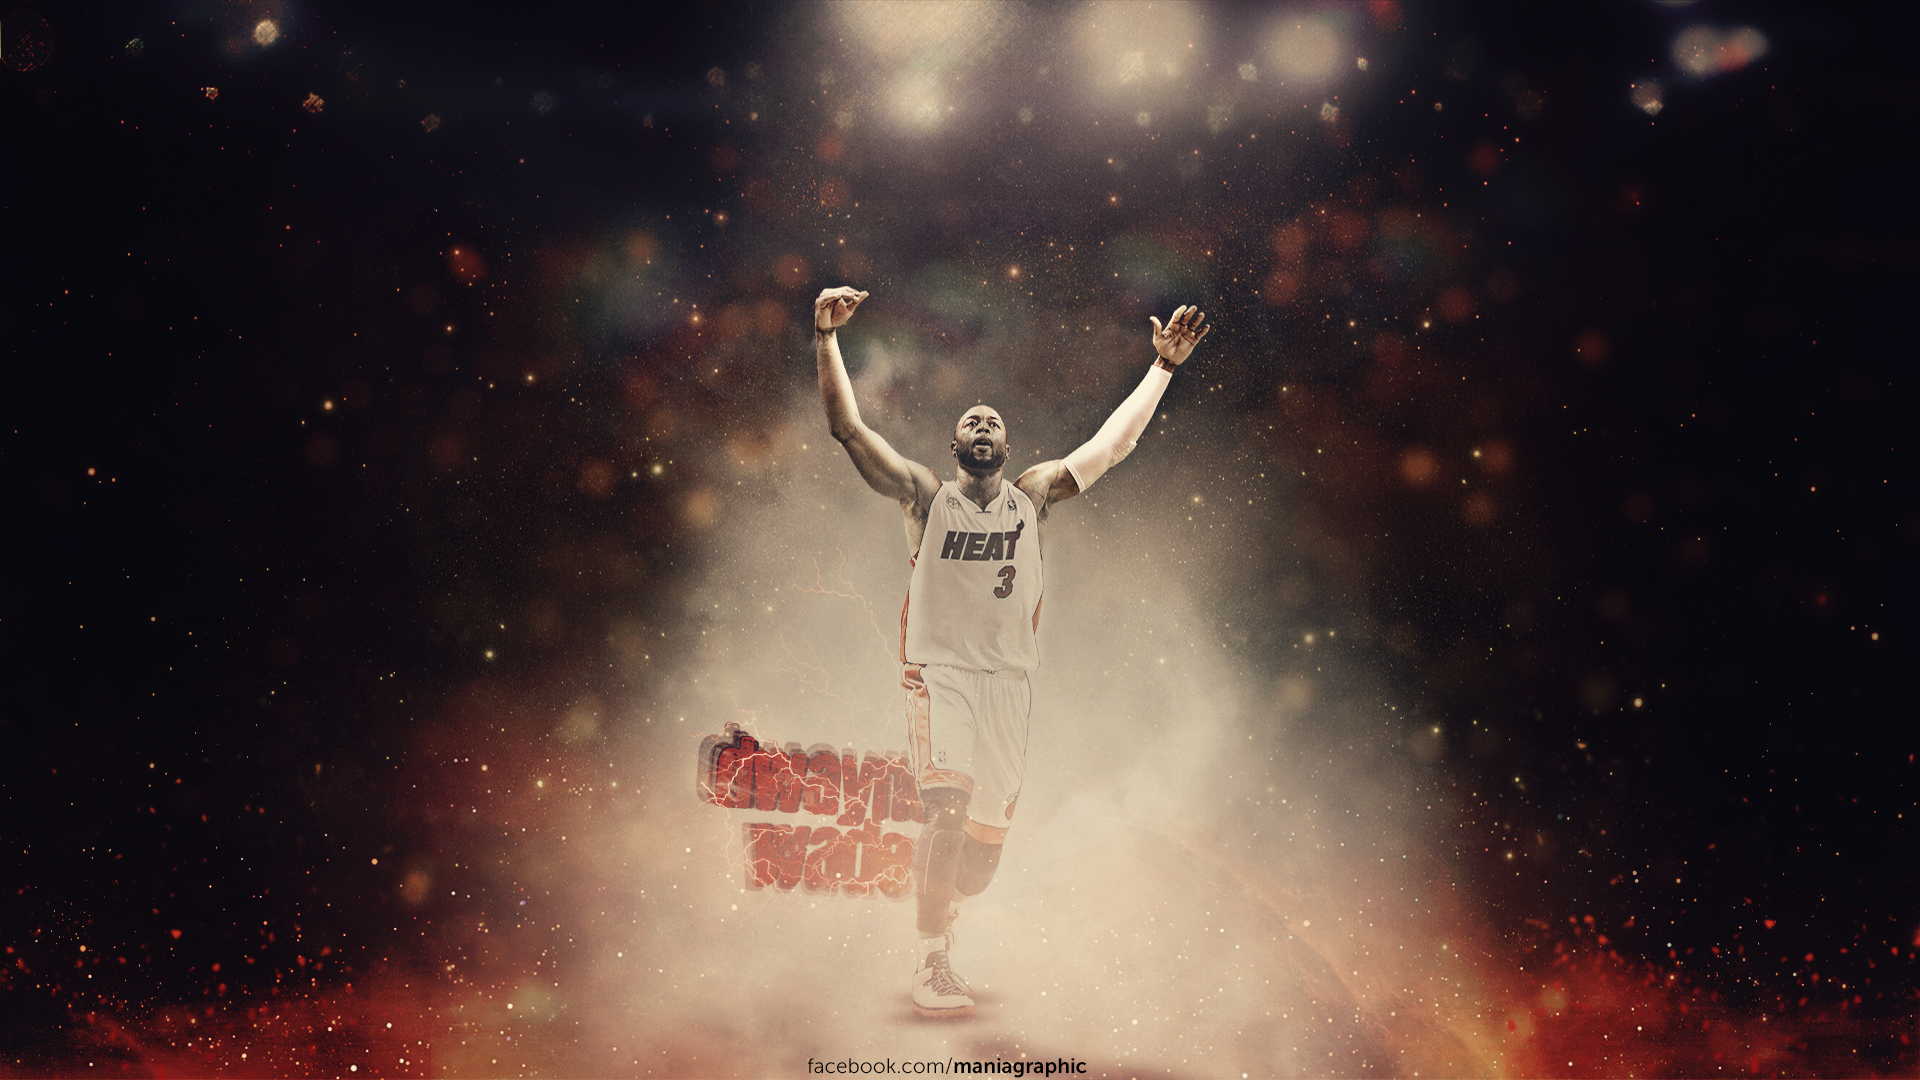 Wallpaper Other Maniagraphic Dwyane Wade Add A